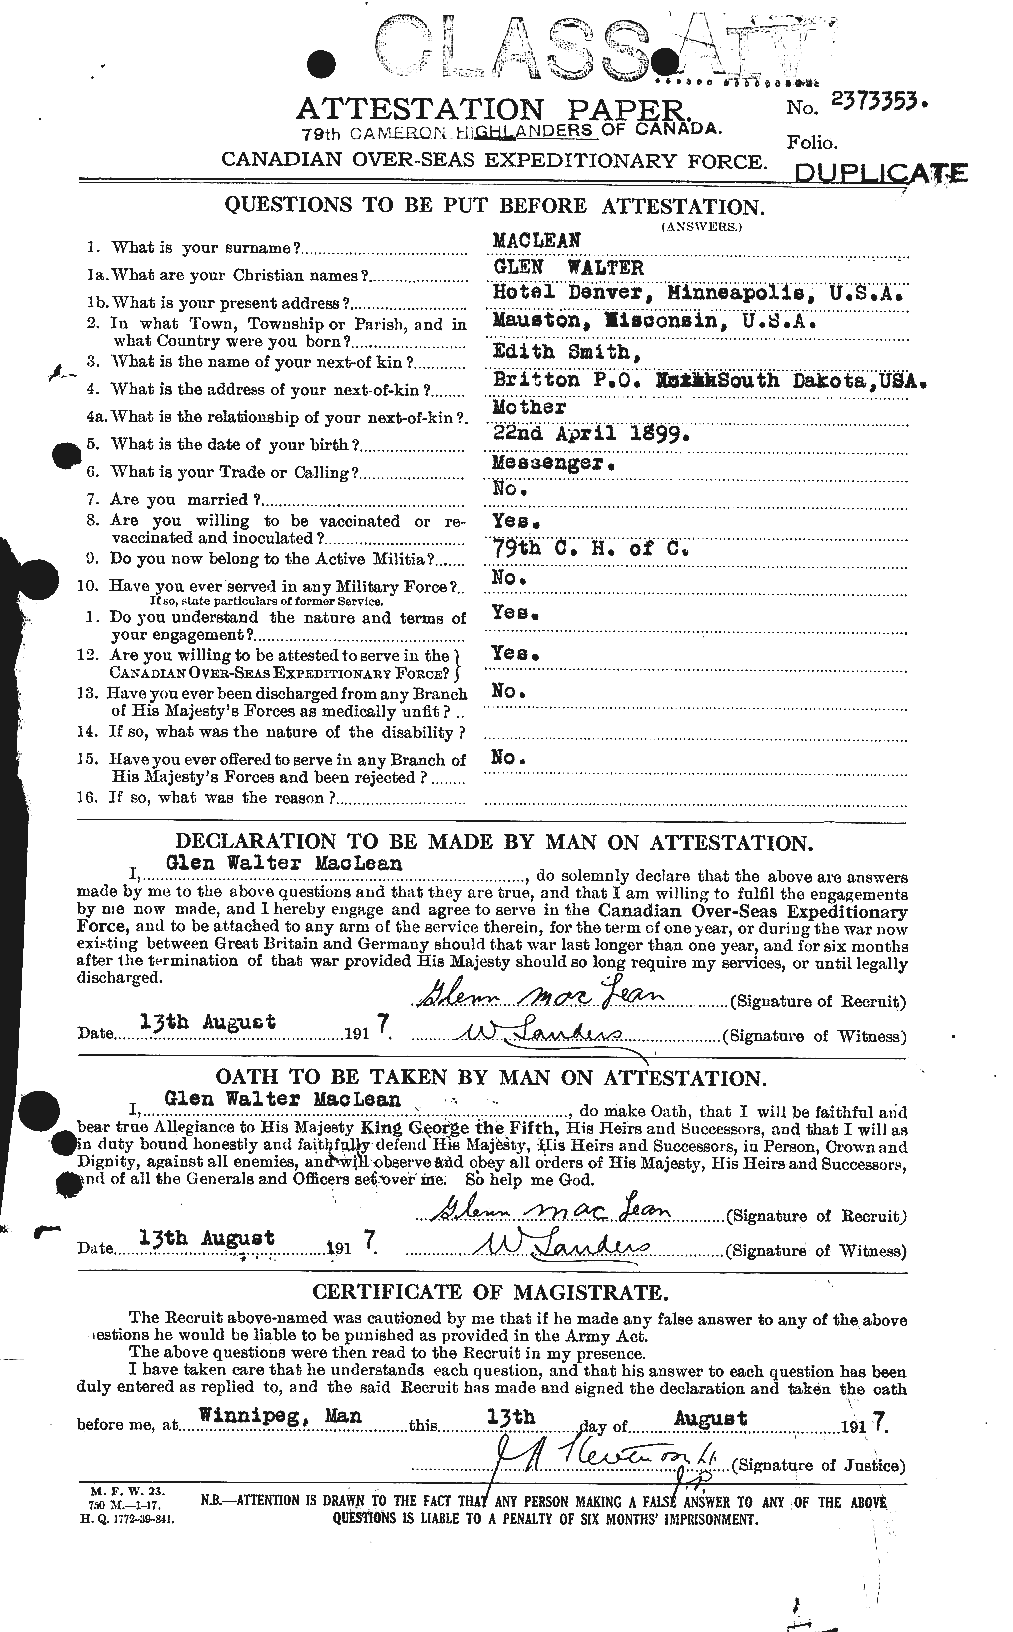 Personnel Records of the First World War - CEF 540304a